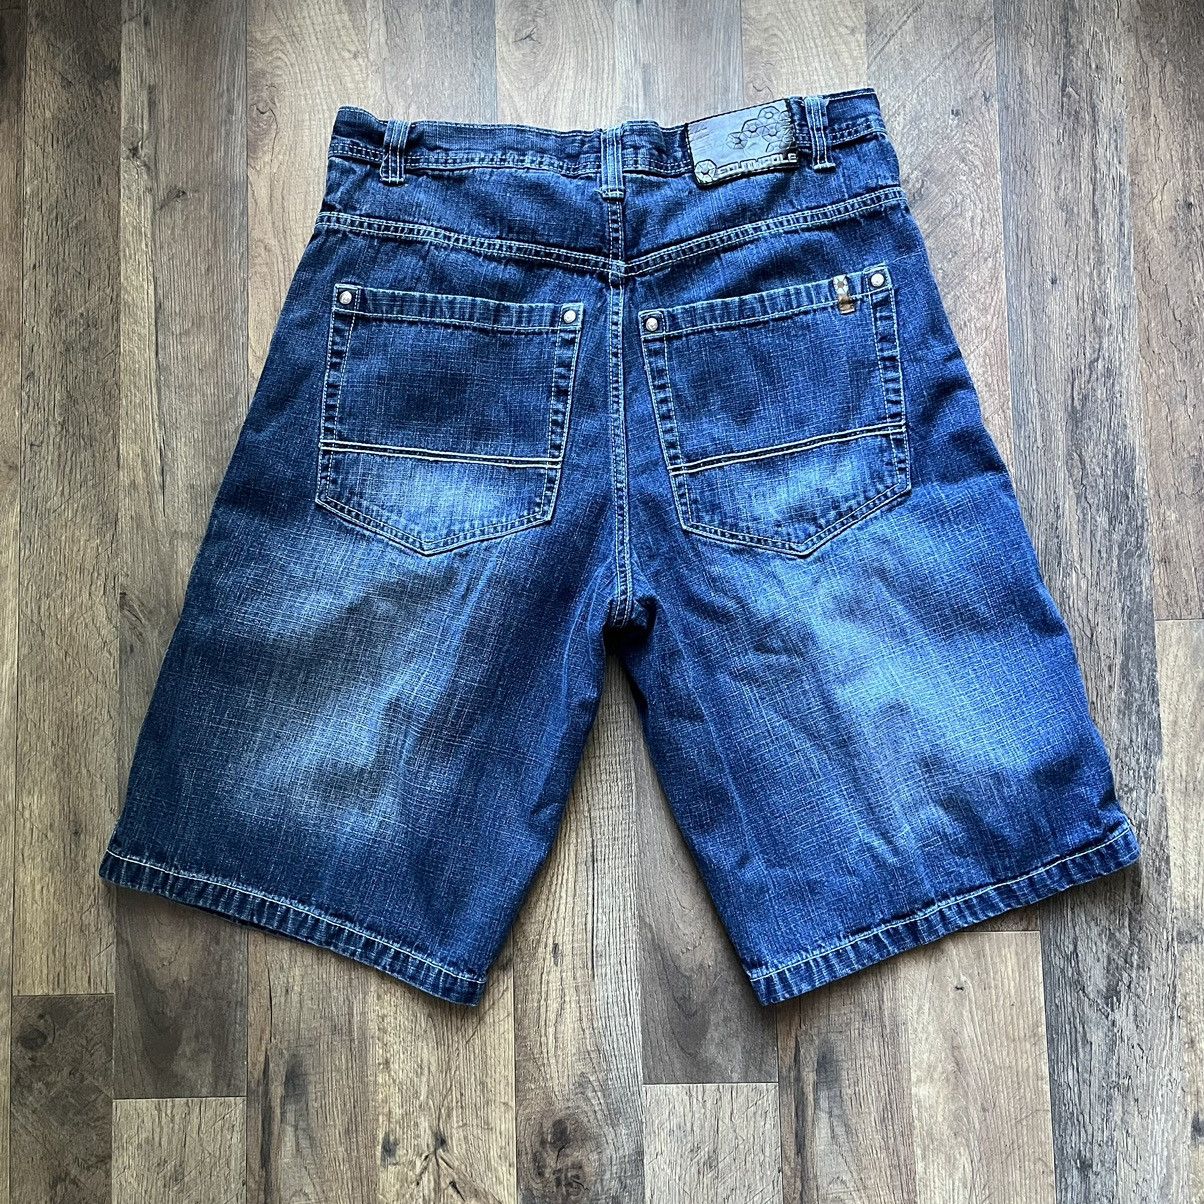 Vintage CRAZY Y2K South Pole Jorts Jnco Style Baggy 38 | Grailed